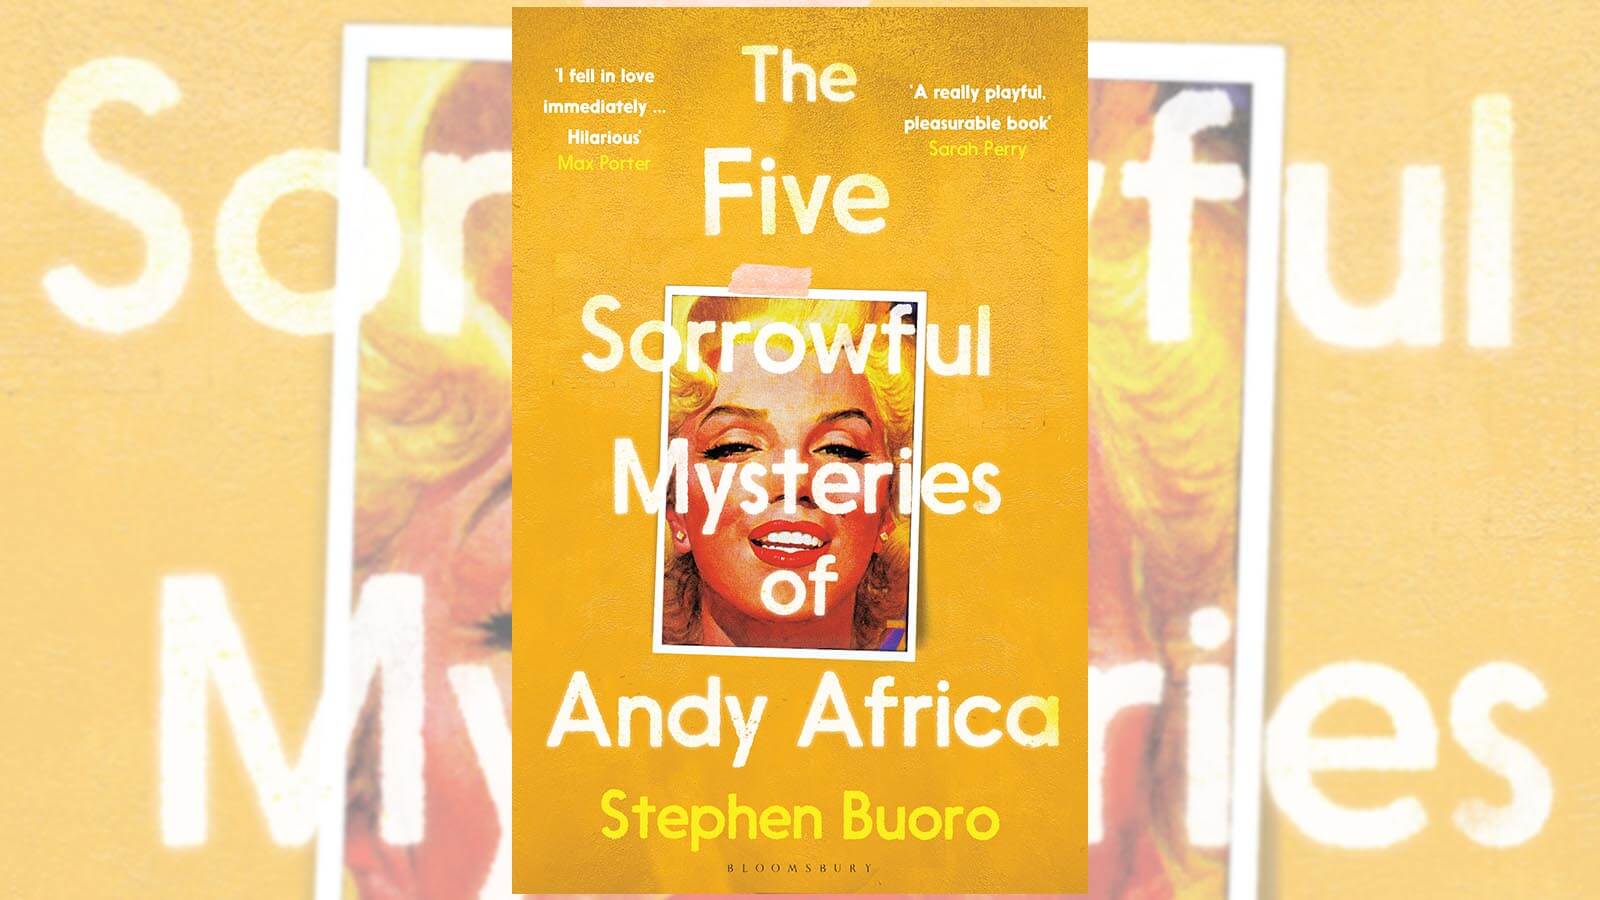 Image of book cover The Five Sorrowful Mysteries Of Andy Africa by Stephen Buoro